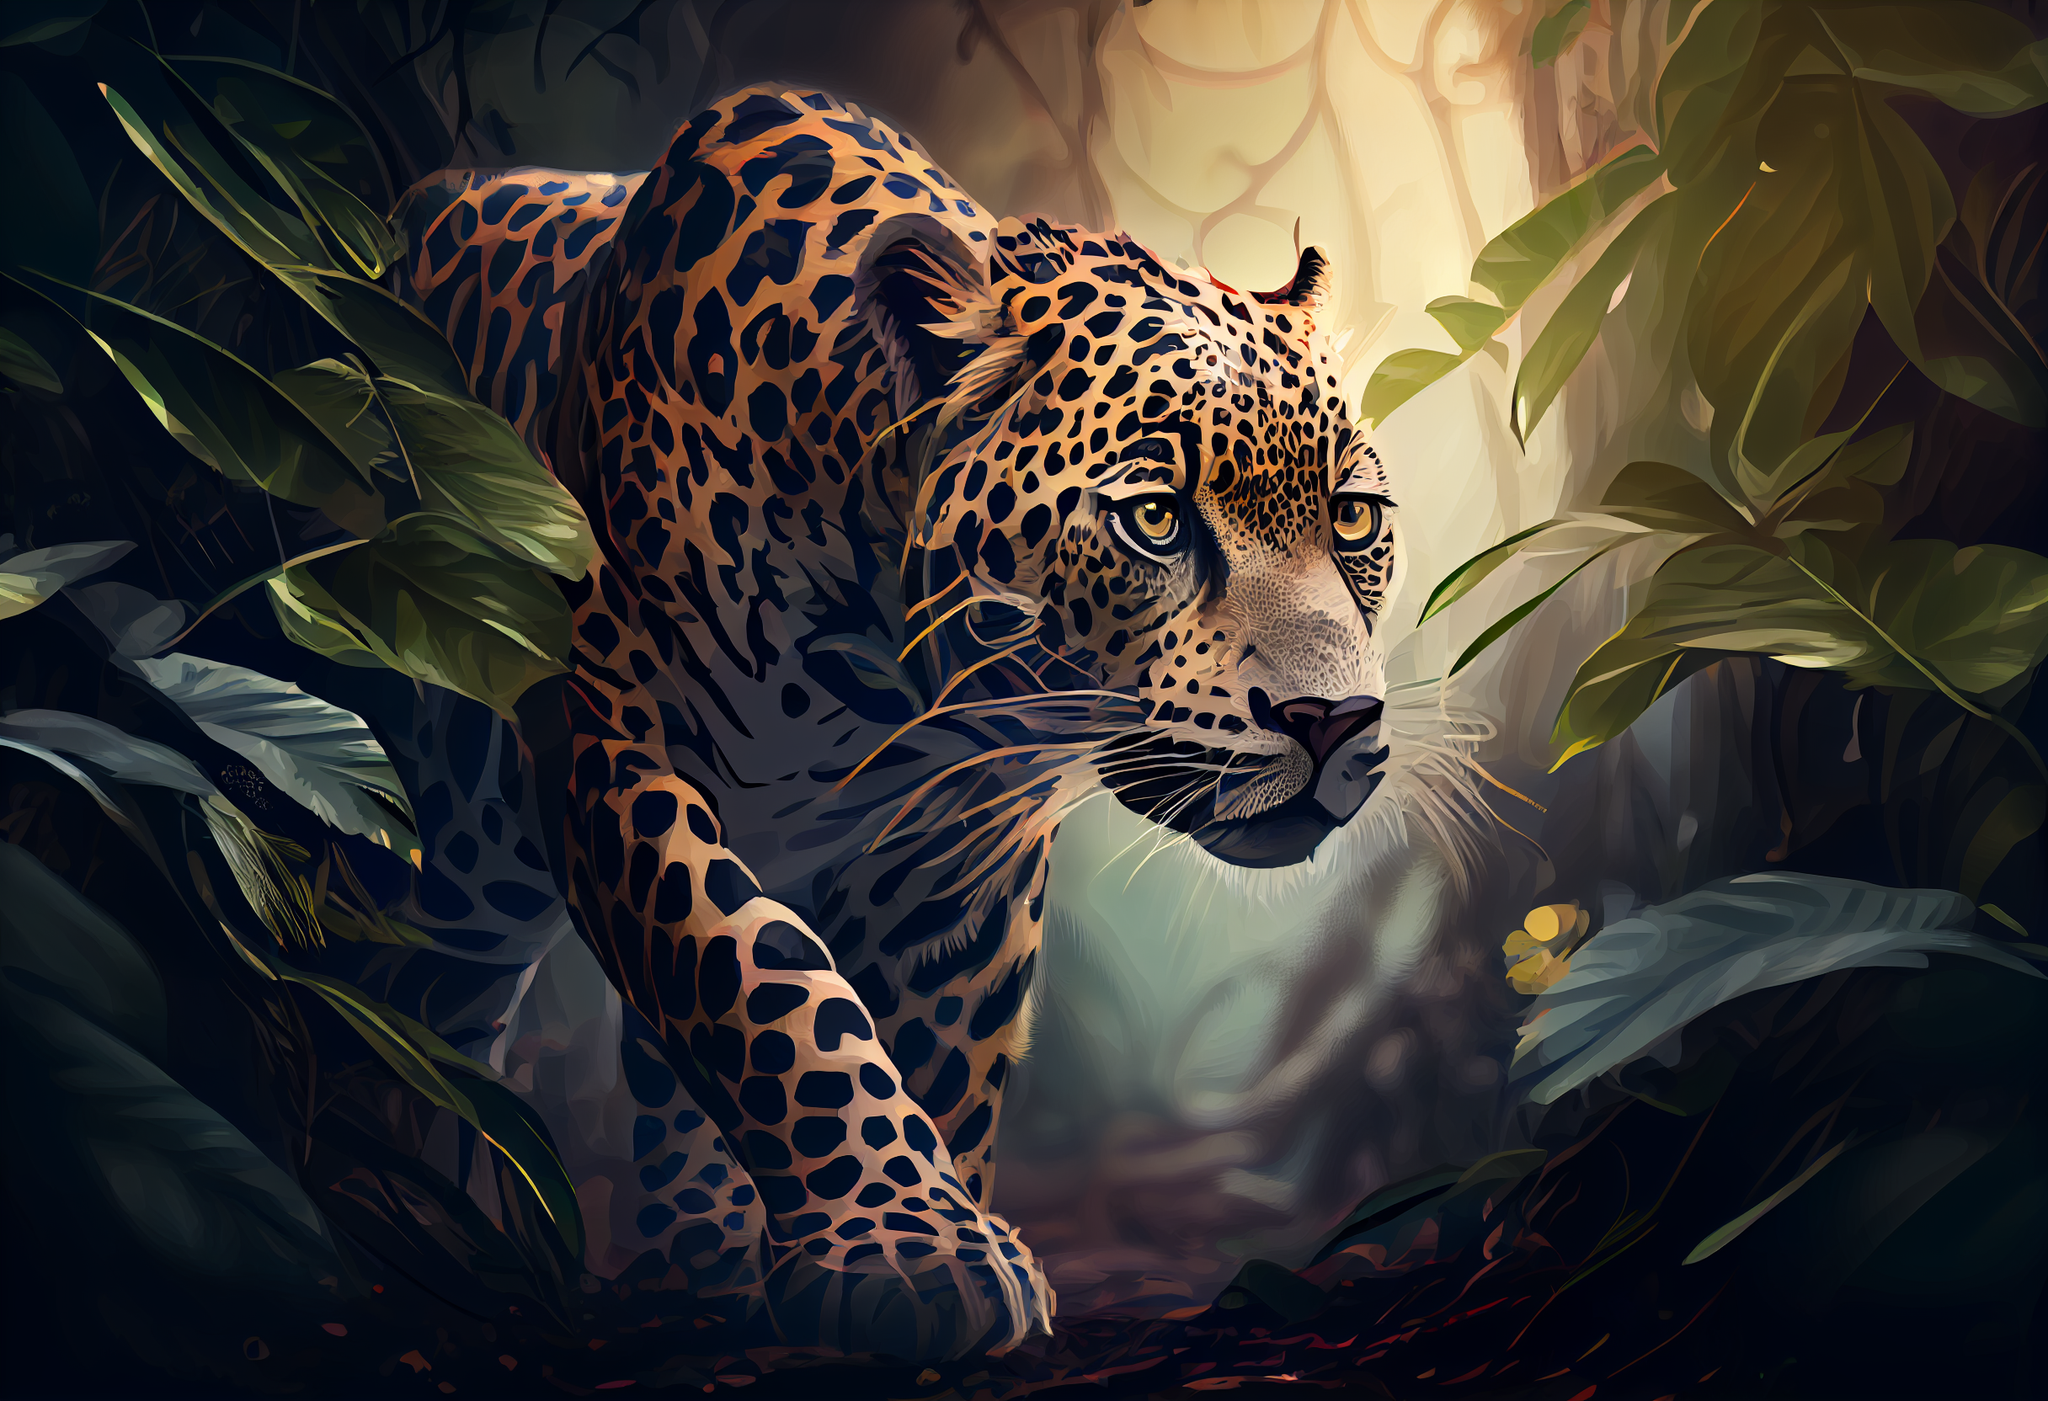 A Stunning Airbrush Print of a Curious Leopard Peeking into the Jungle